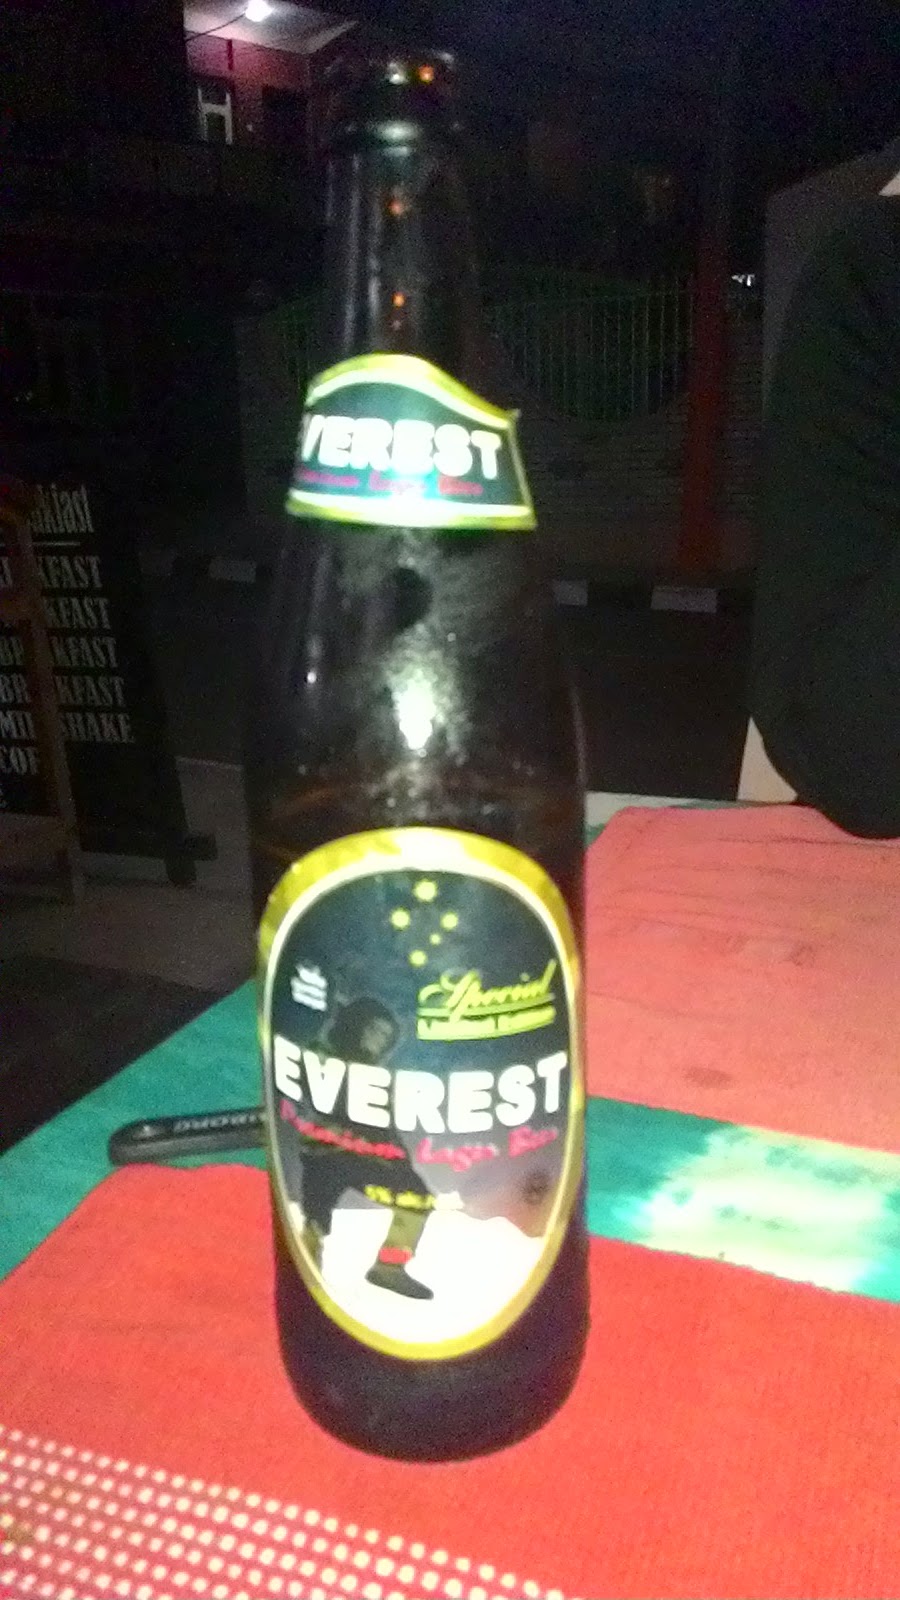 Everest beer from nepal